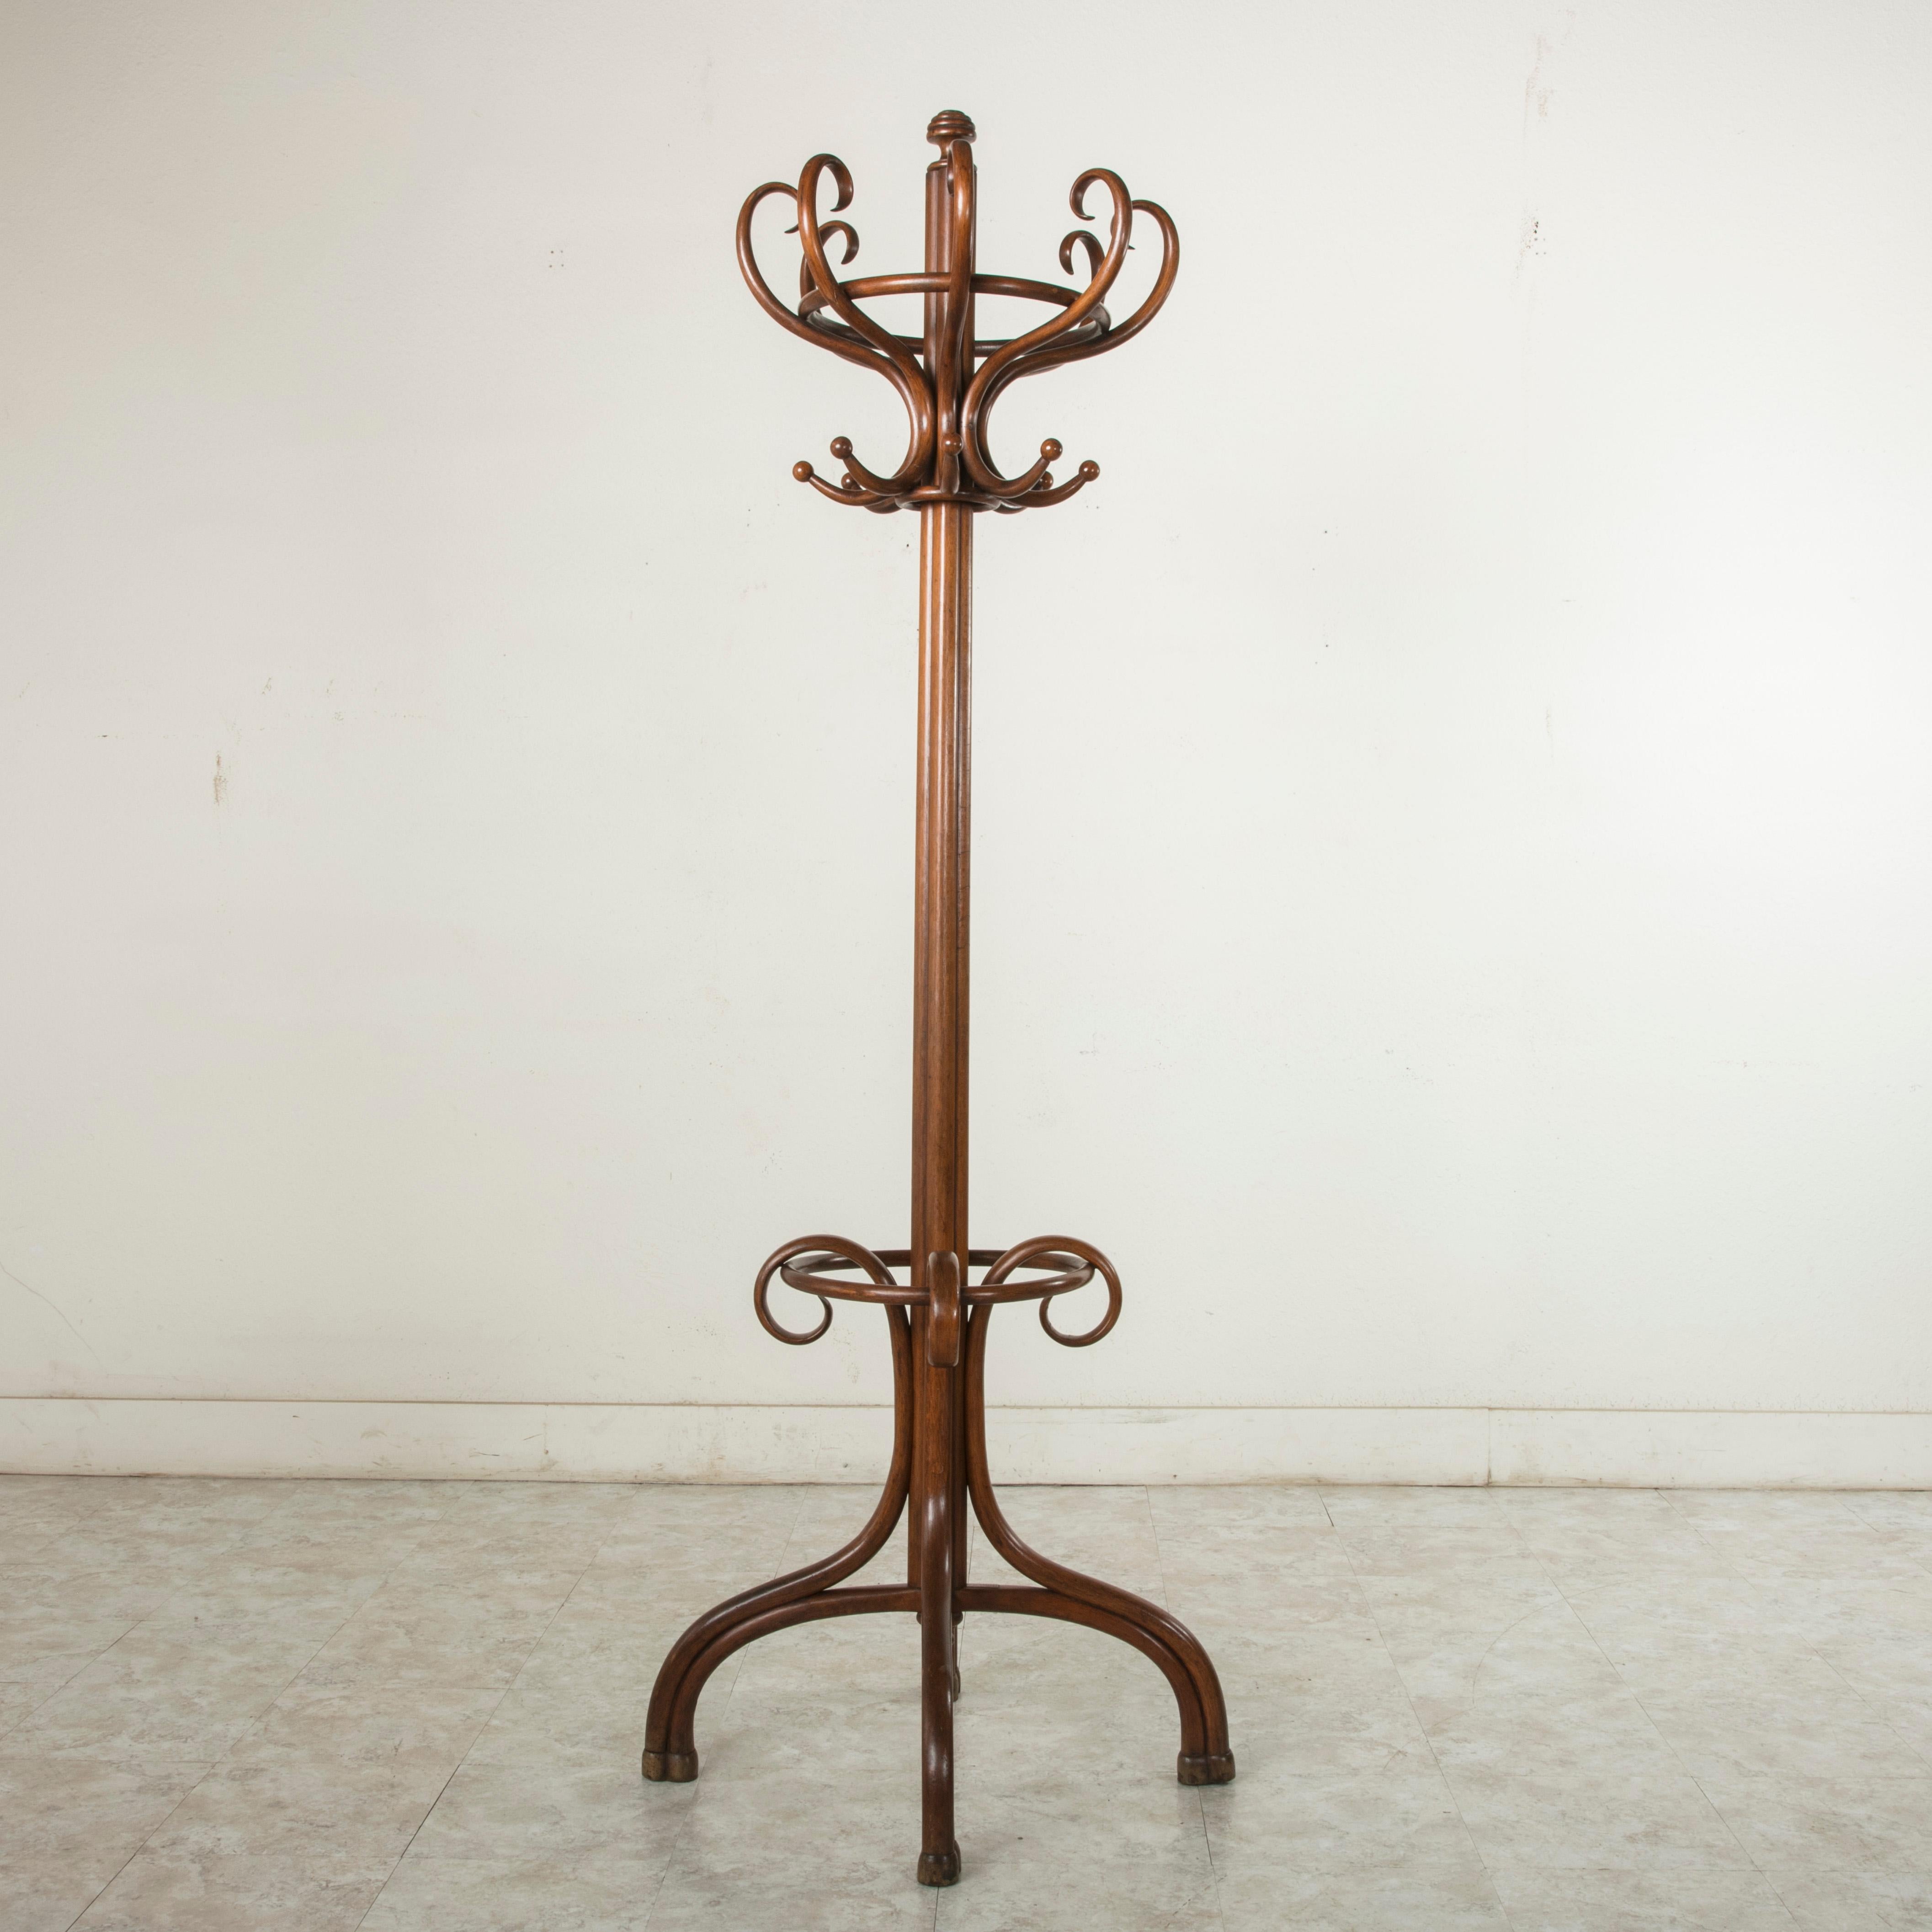 This Classic Thonet style hat and coat rack or hall tree is made of richly finished bent beech wood. It features sixteen hat and coat hooks and an umbrella holder below. A maker's plaque under the umbrella holder is marked Morel Goyer, Lille. A